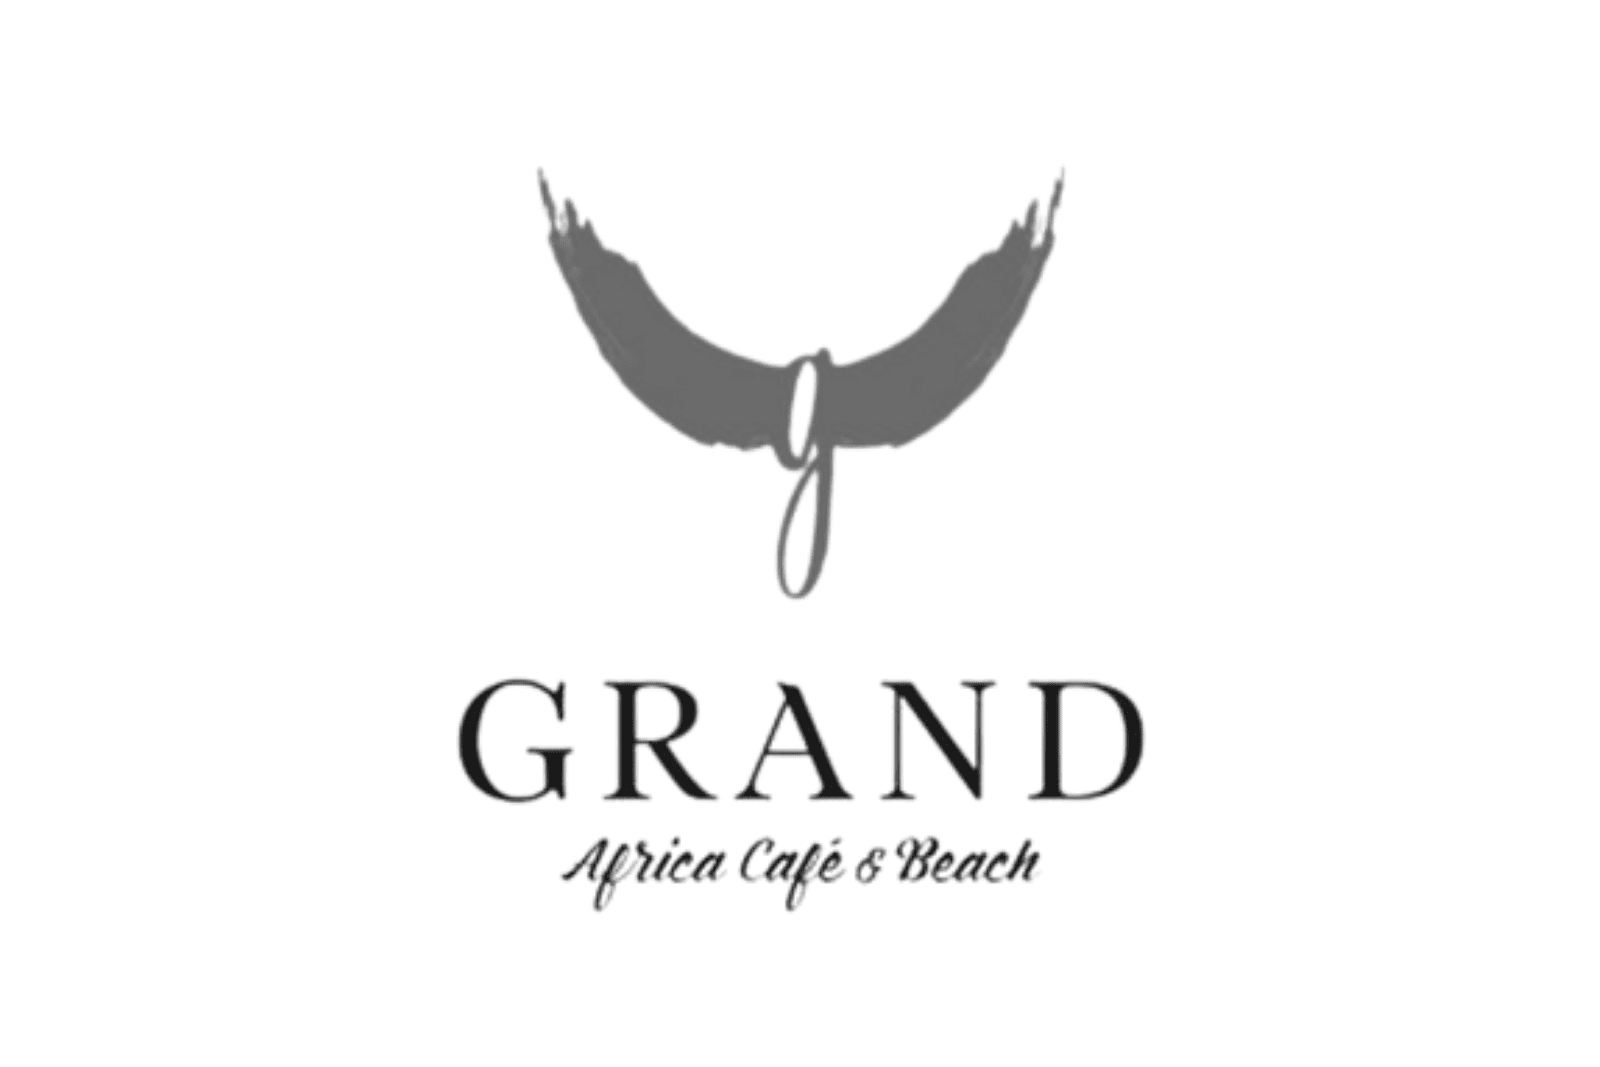 Grand Africa Cafe & Beach is an official business partner of The Secret Love Project